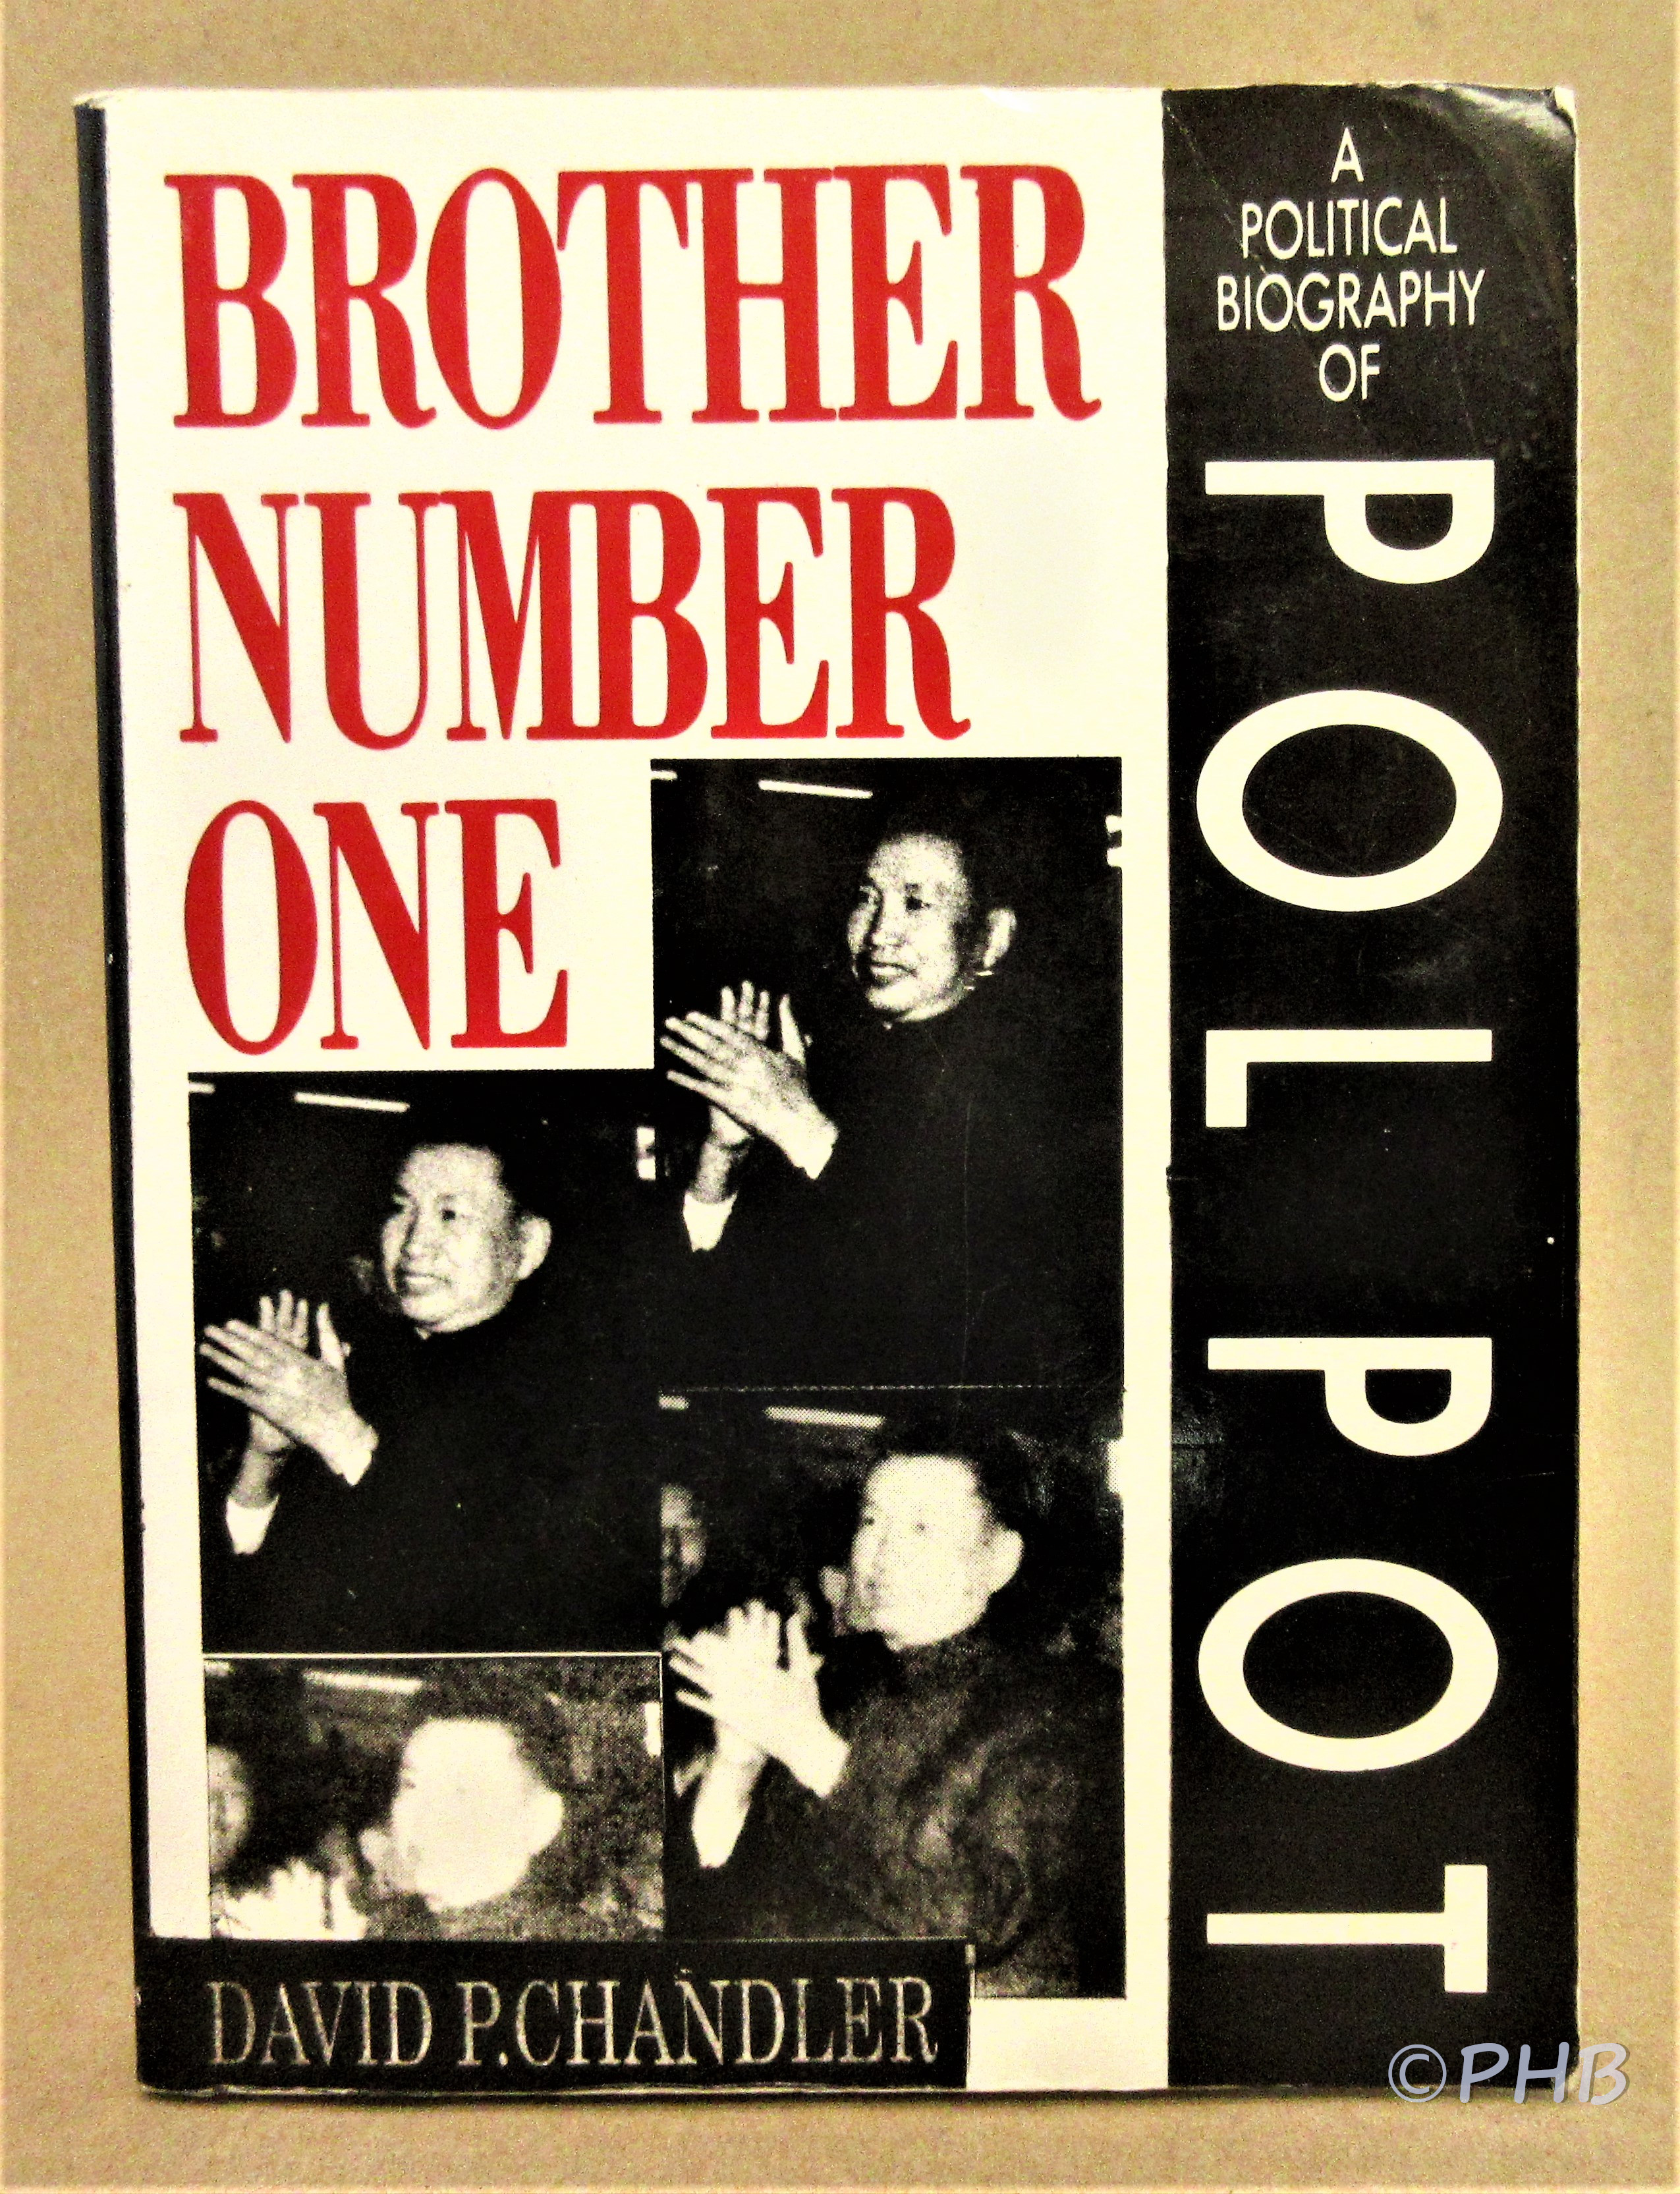 Brother Number One: A Political Biography of Pol Pot - Chandler, David P.